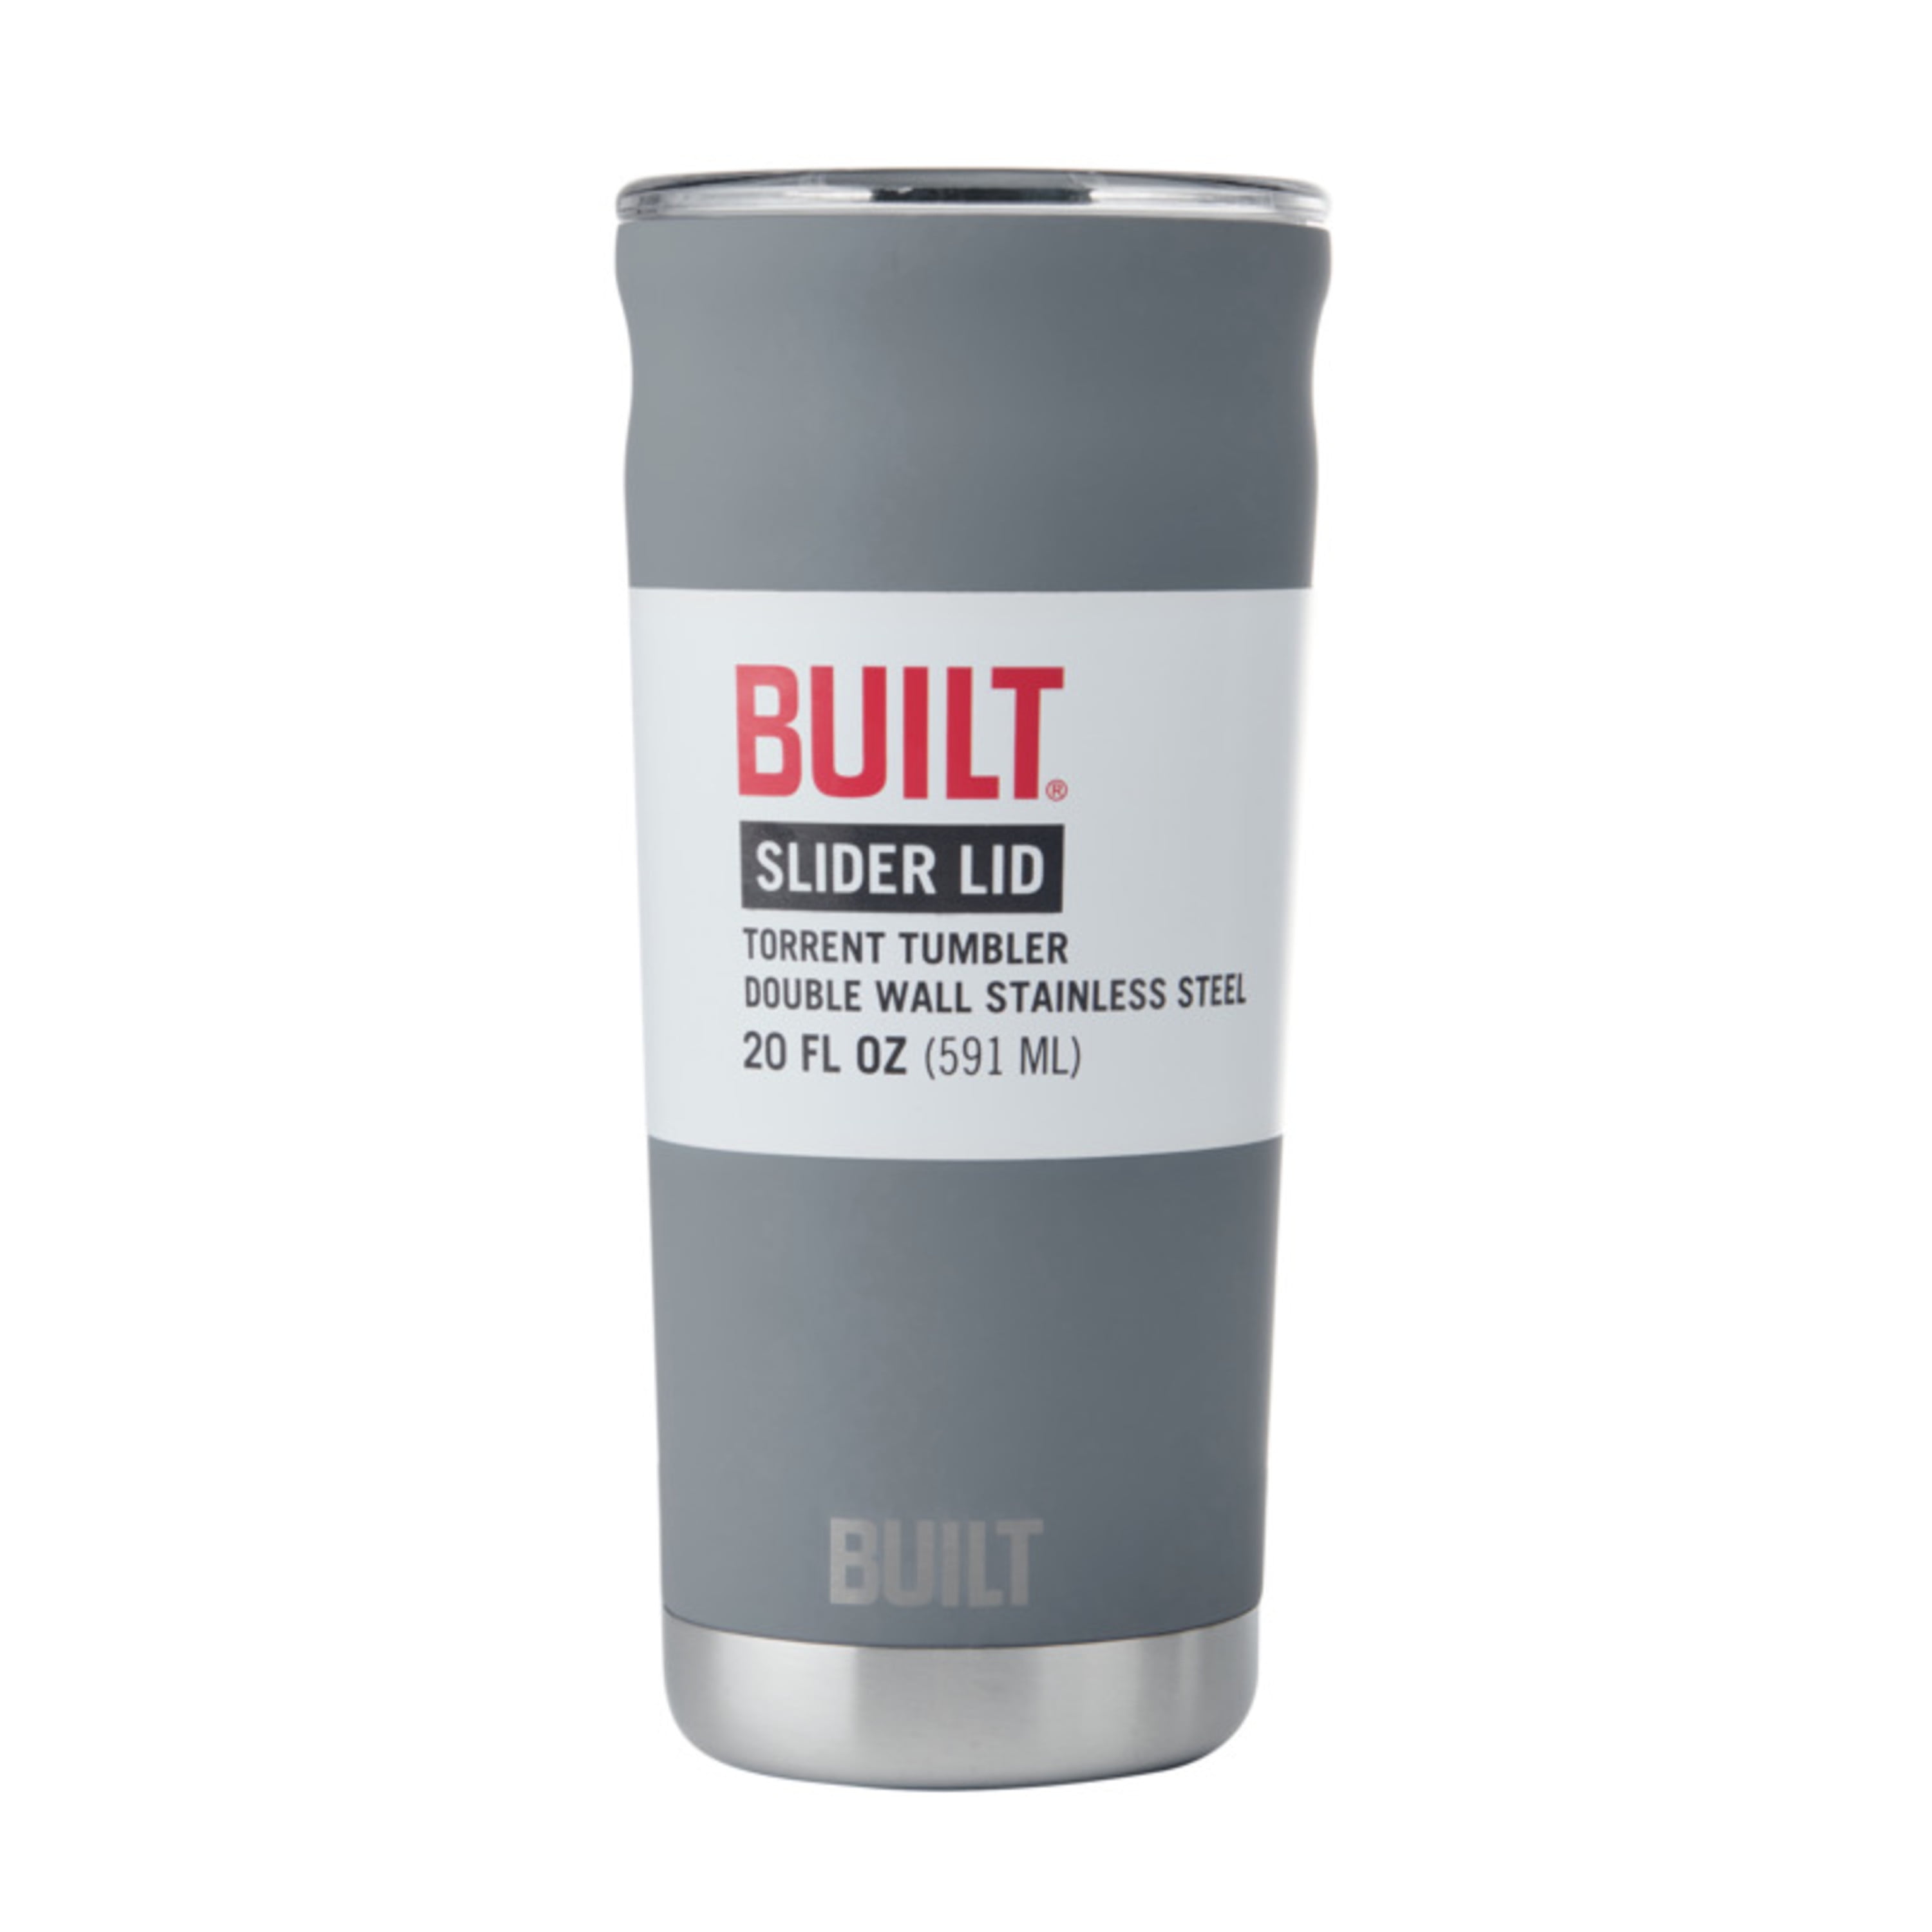 Built Torrent Double Wall Stainless Steel 20 fl oz Tumbler